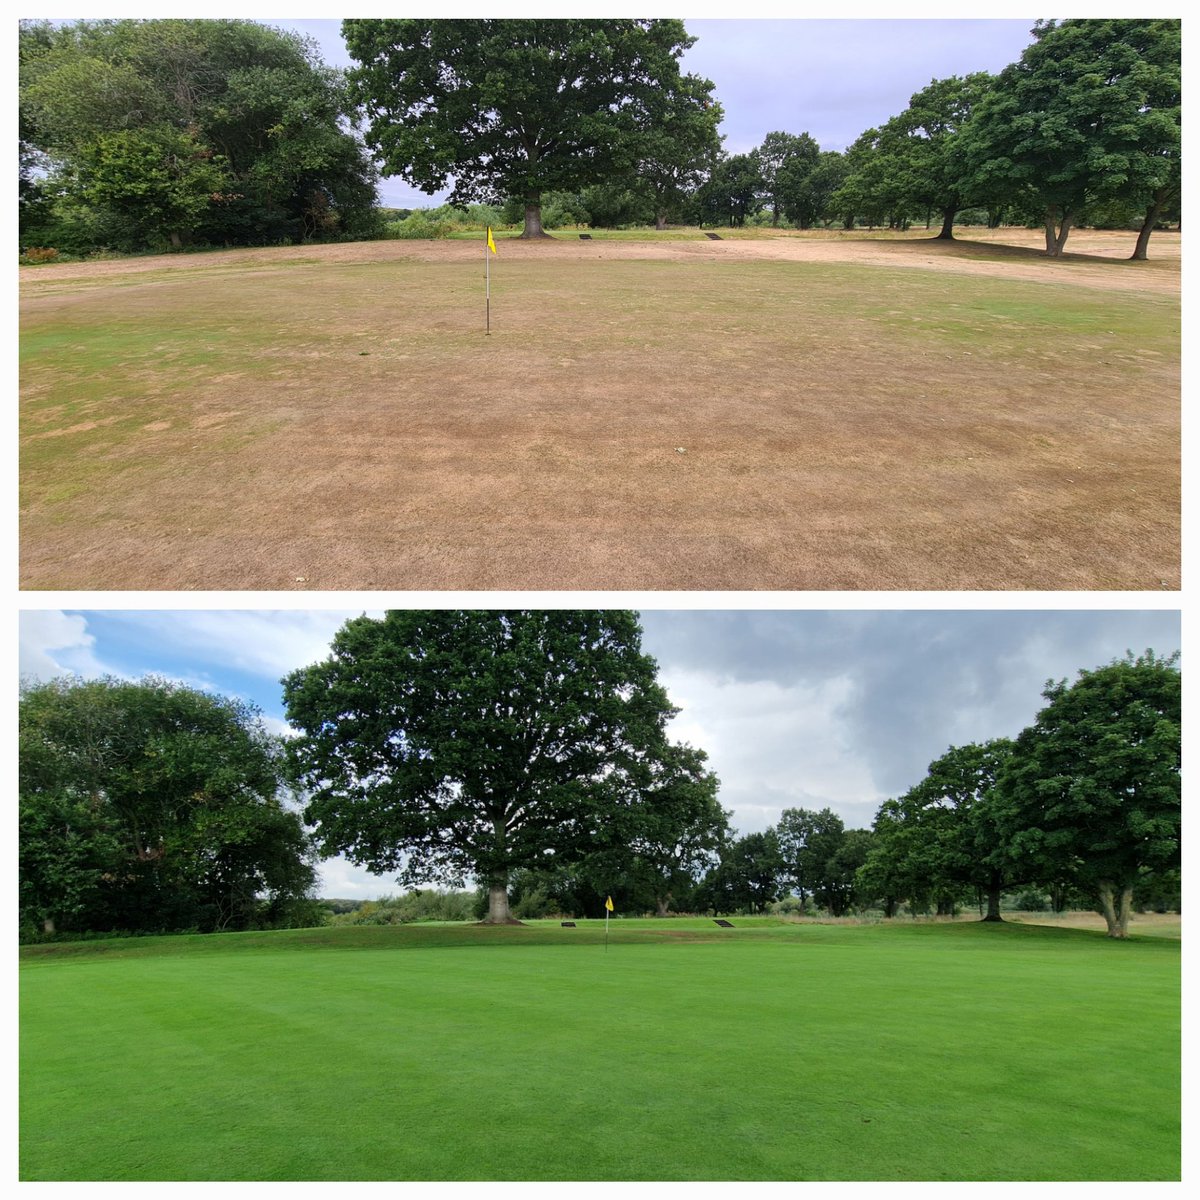 2 weeks before record temperatures hit the UK we lost our irrigation! Inevitably the greens suffered & the front 9 holes had to be closed while a seeding & recovery programme was implemented. 7 weeks later we are now fully open!